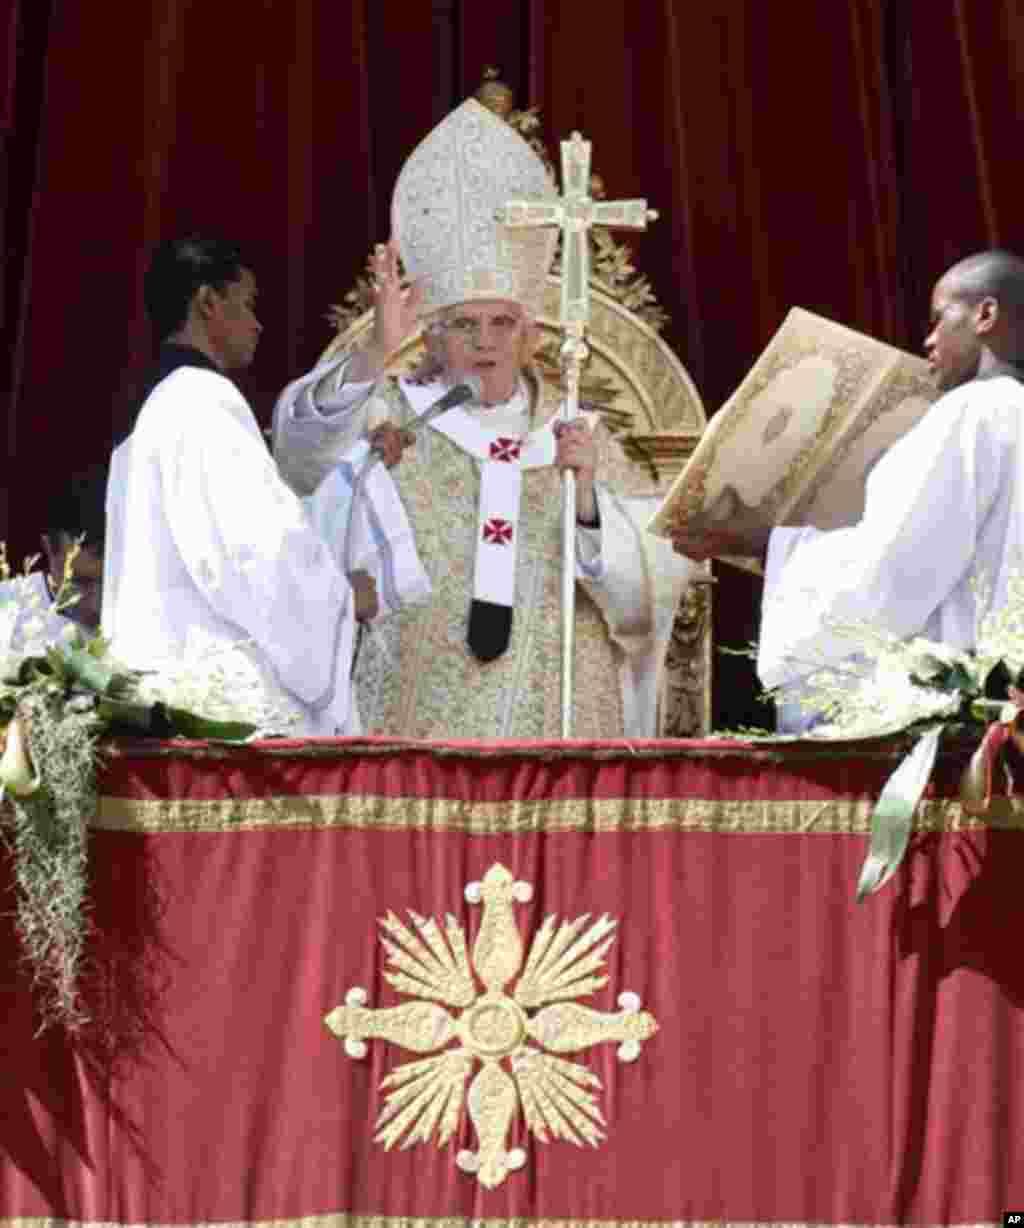 Pope Benedict XVI gives the Urbi and Orbi blessing at the end of the Easter Mass in St. Peter's Square at the the Vatican Sunday, April 8, 2012. Pope Benedict XVI in his Easter Sunday message has urged the Syrian regime to heed international calls to end 